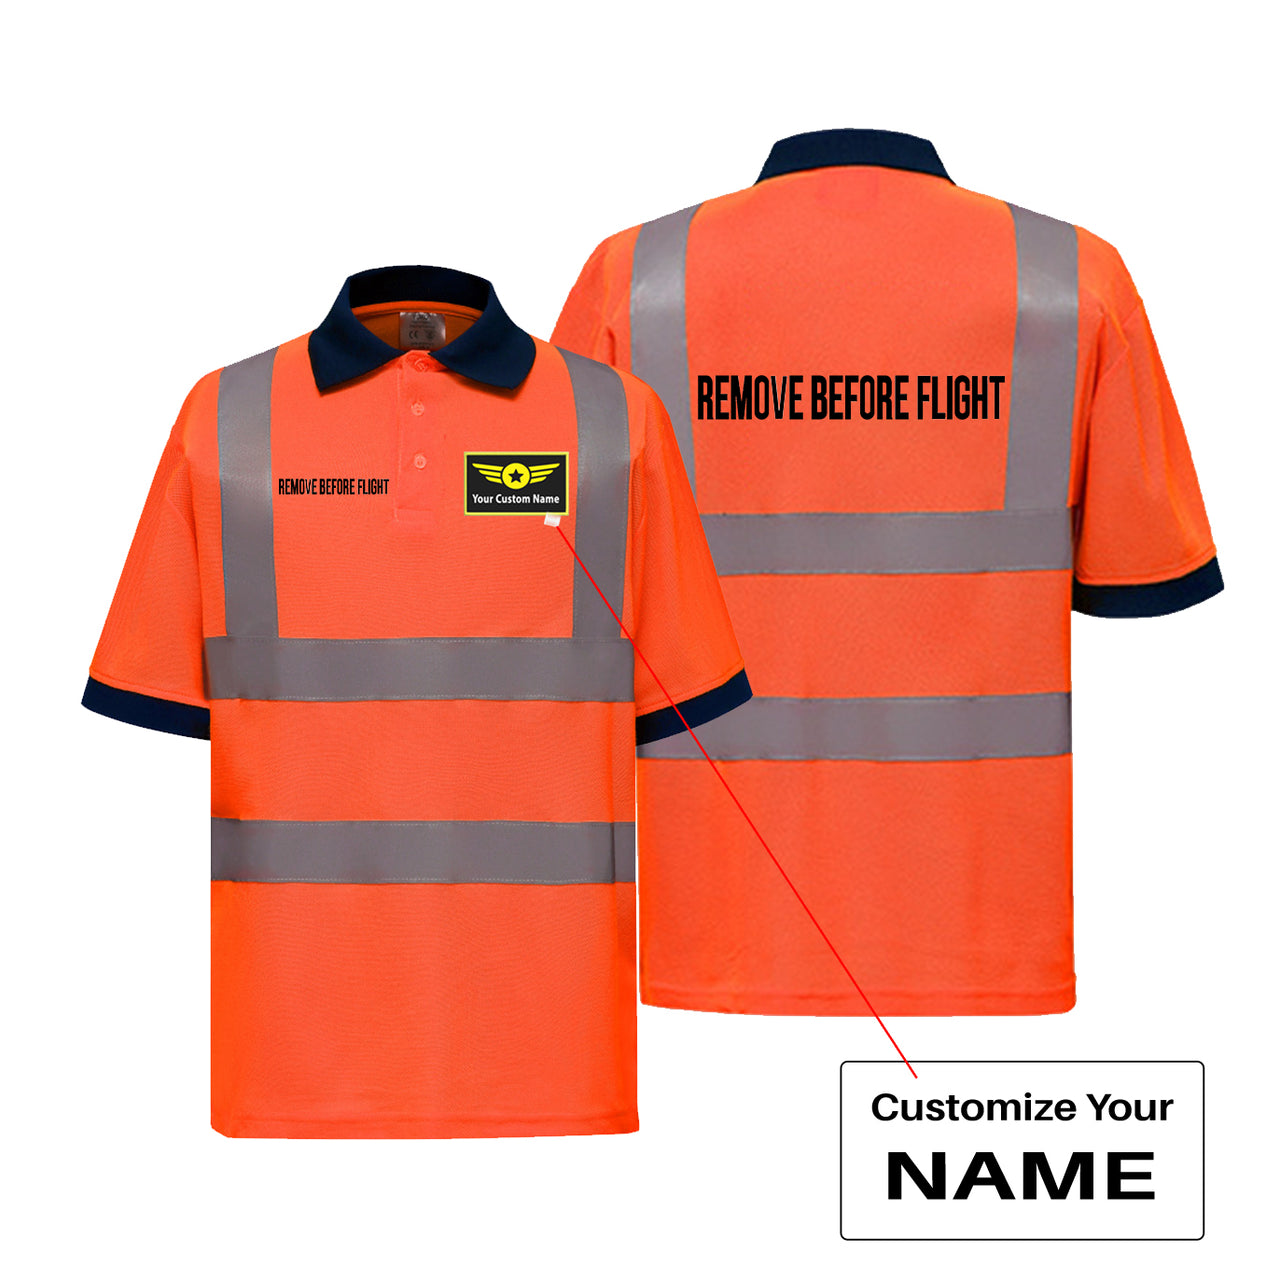 Remove Before Flight 2 Designed Reflective Polo T-Shirts